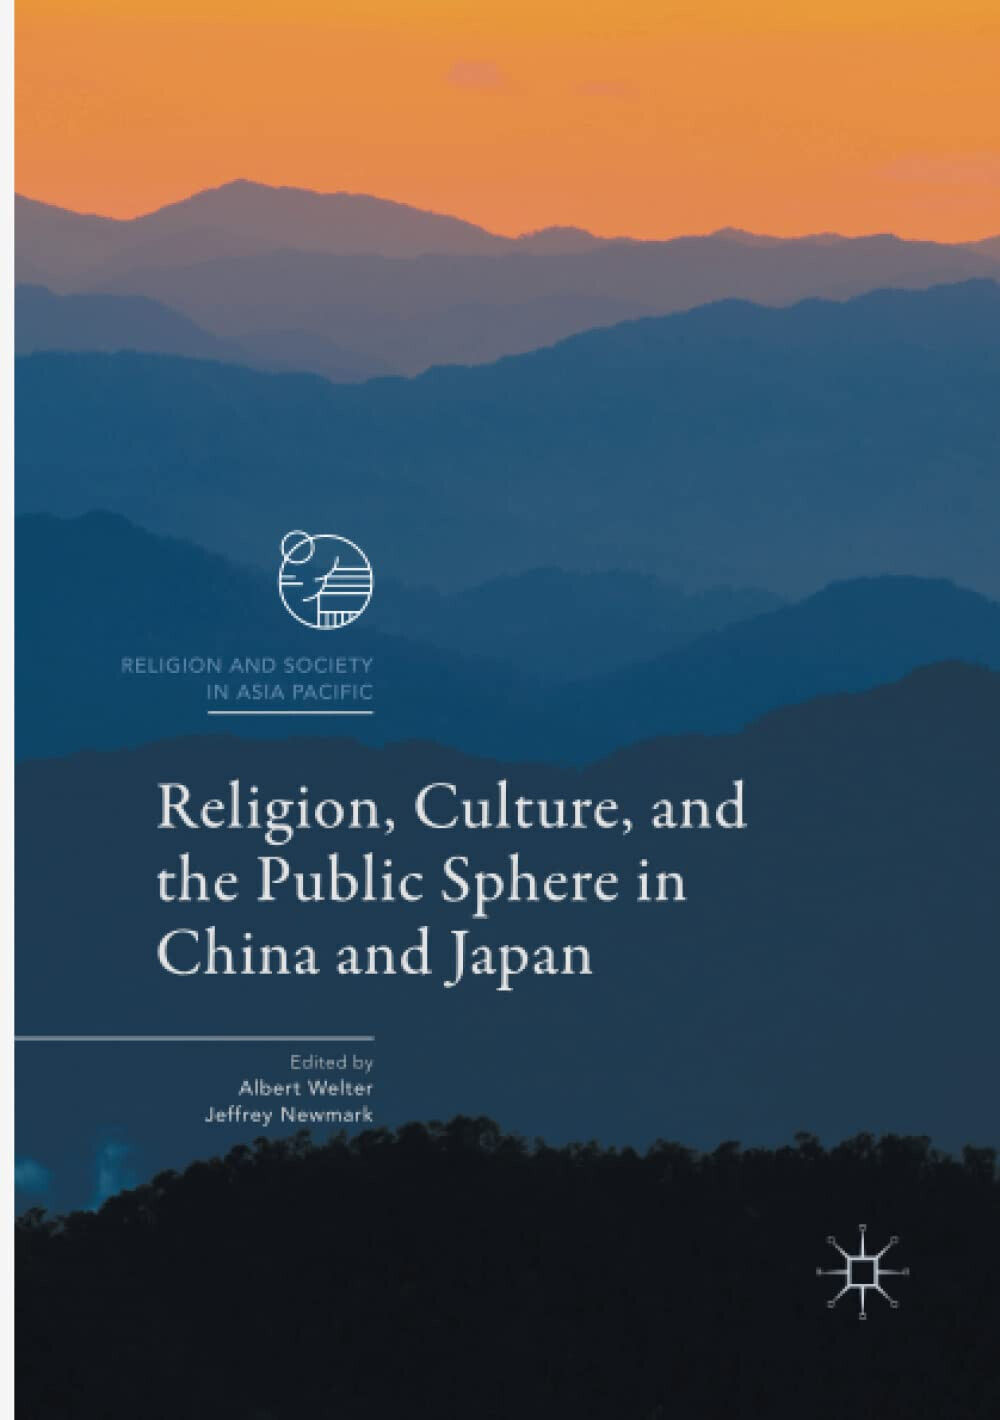 Religion, Culture, and the Public Sphere in China and Japan - Albert Welter-2018